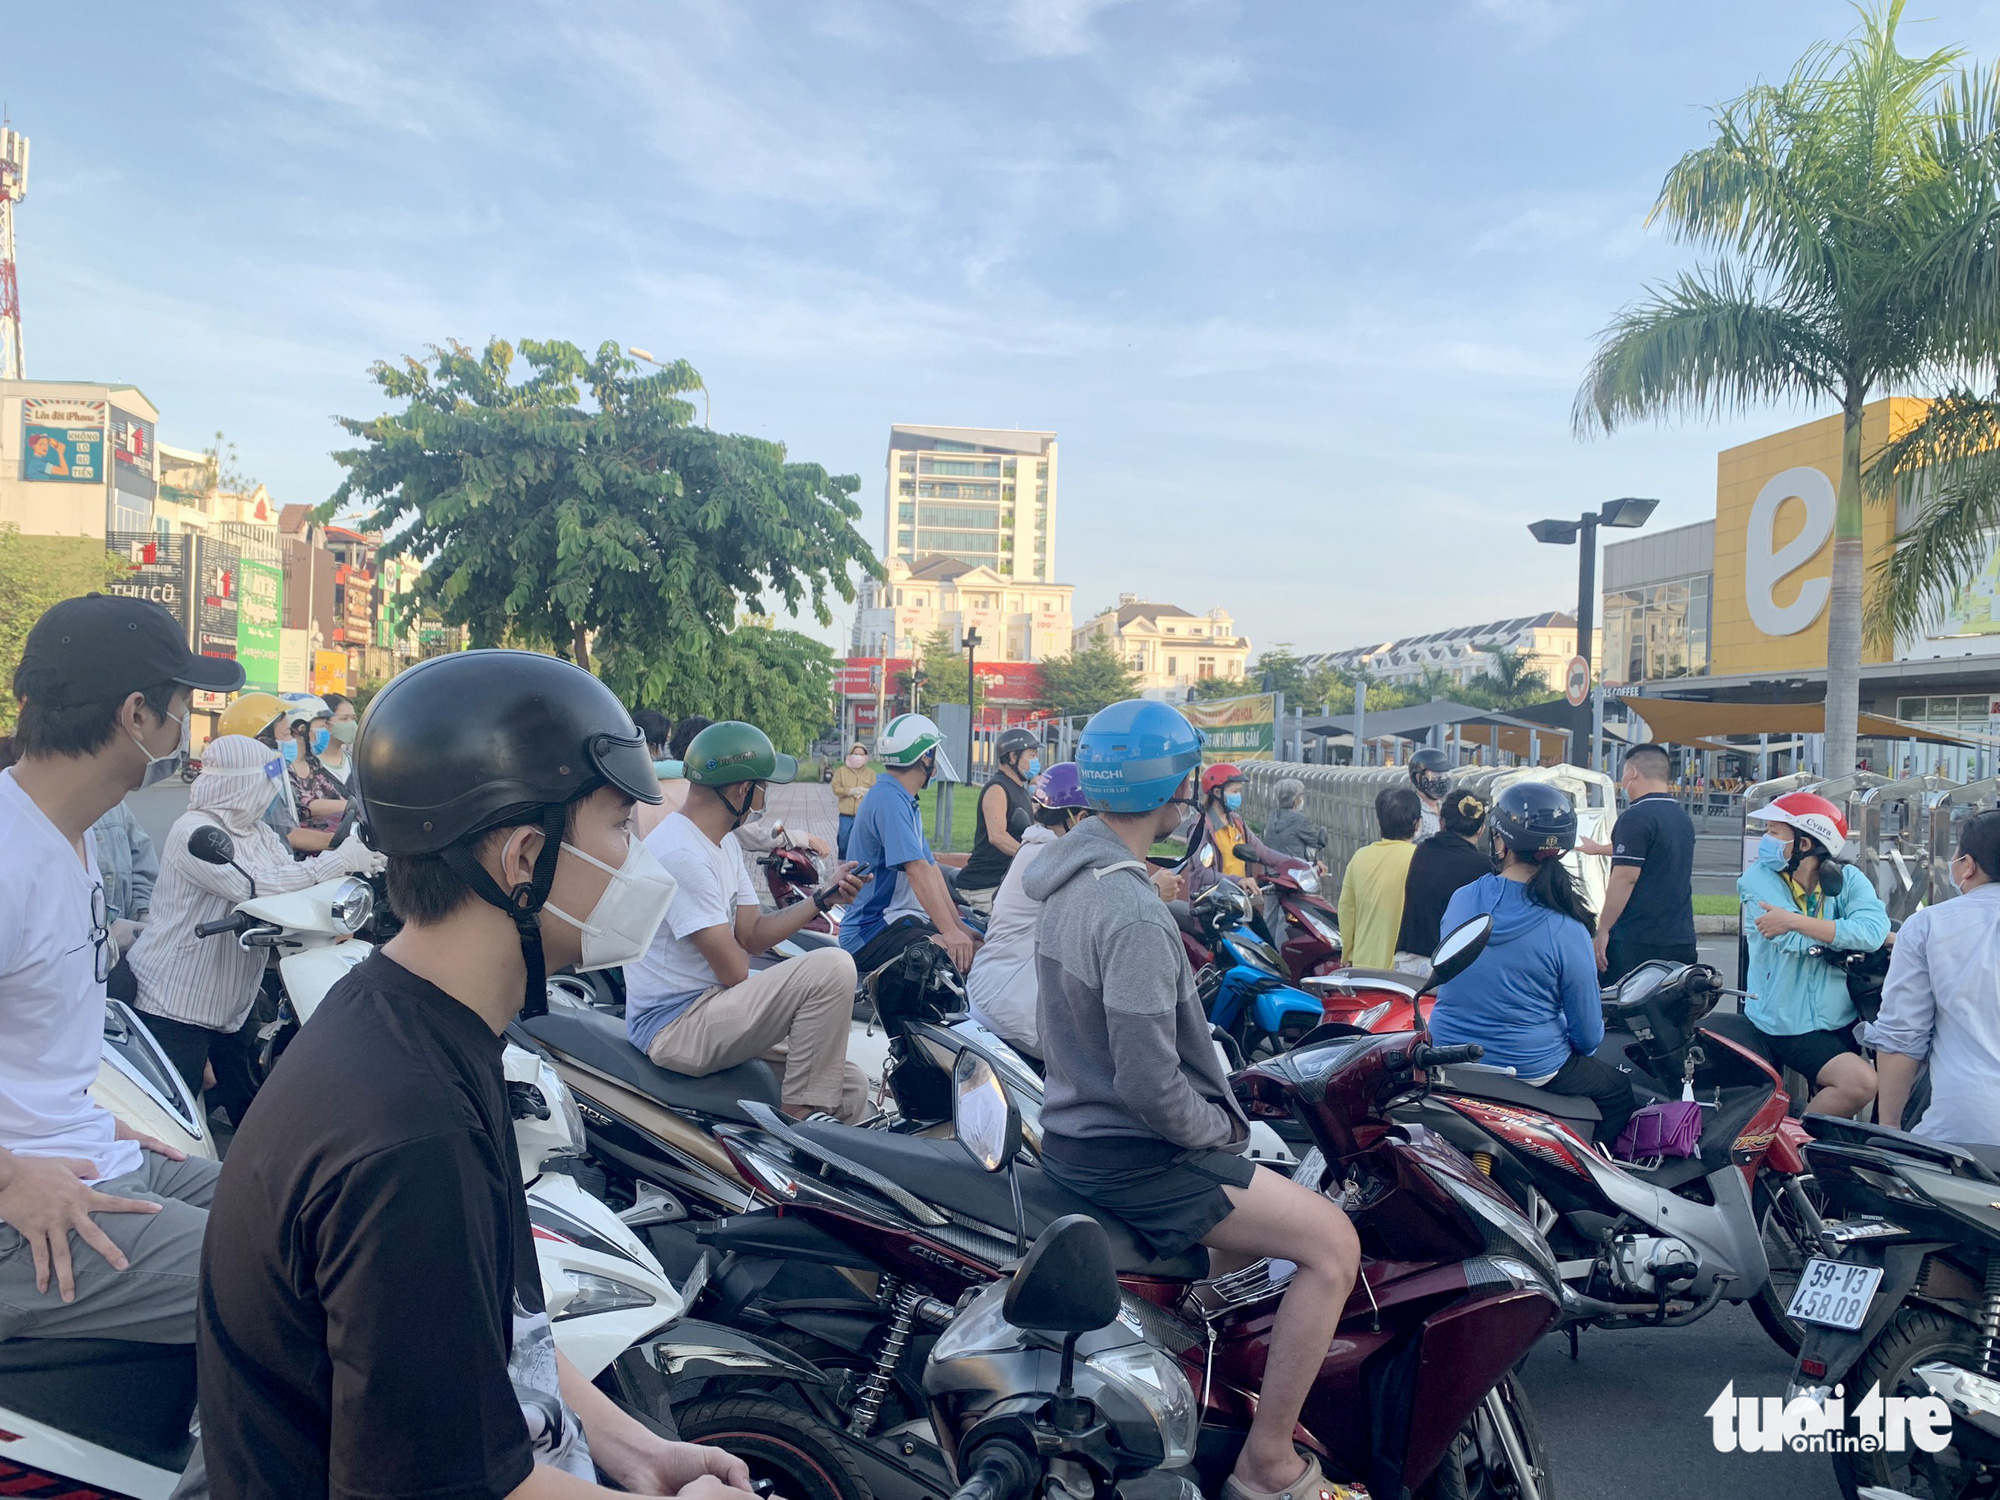 Customers wait in front of a parking lot at Emart Supermarket in Go Vap District, Ho Chi Minh City, August 22, 2021. Photo: Bong Mai / Tuoi Tre